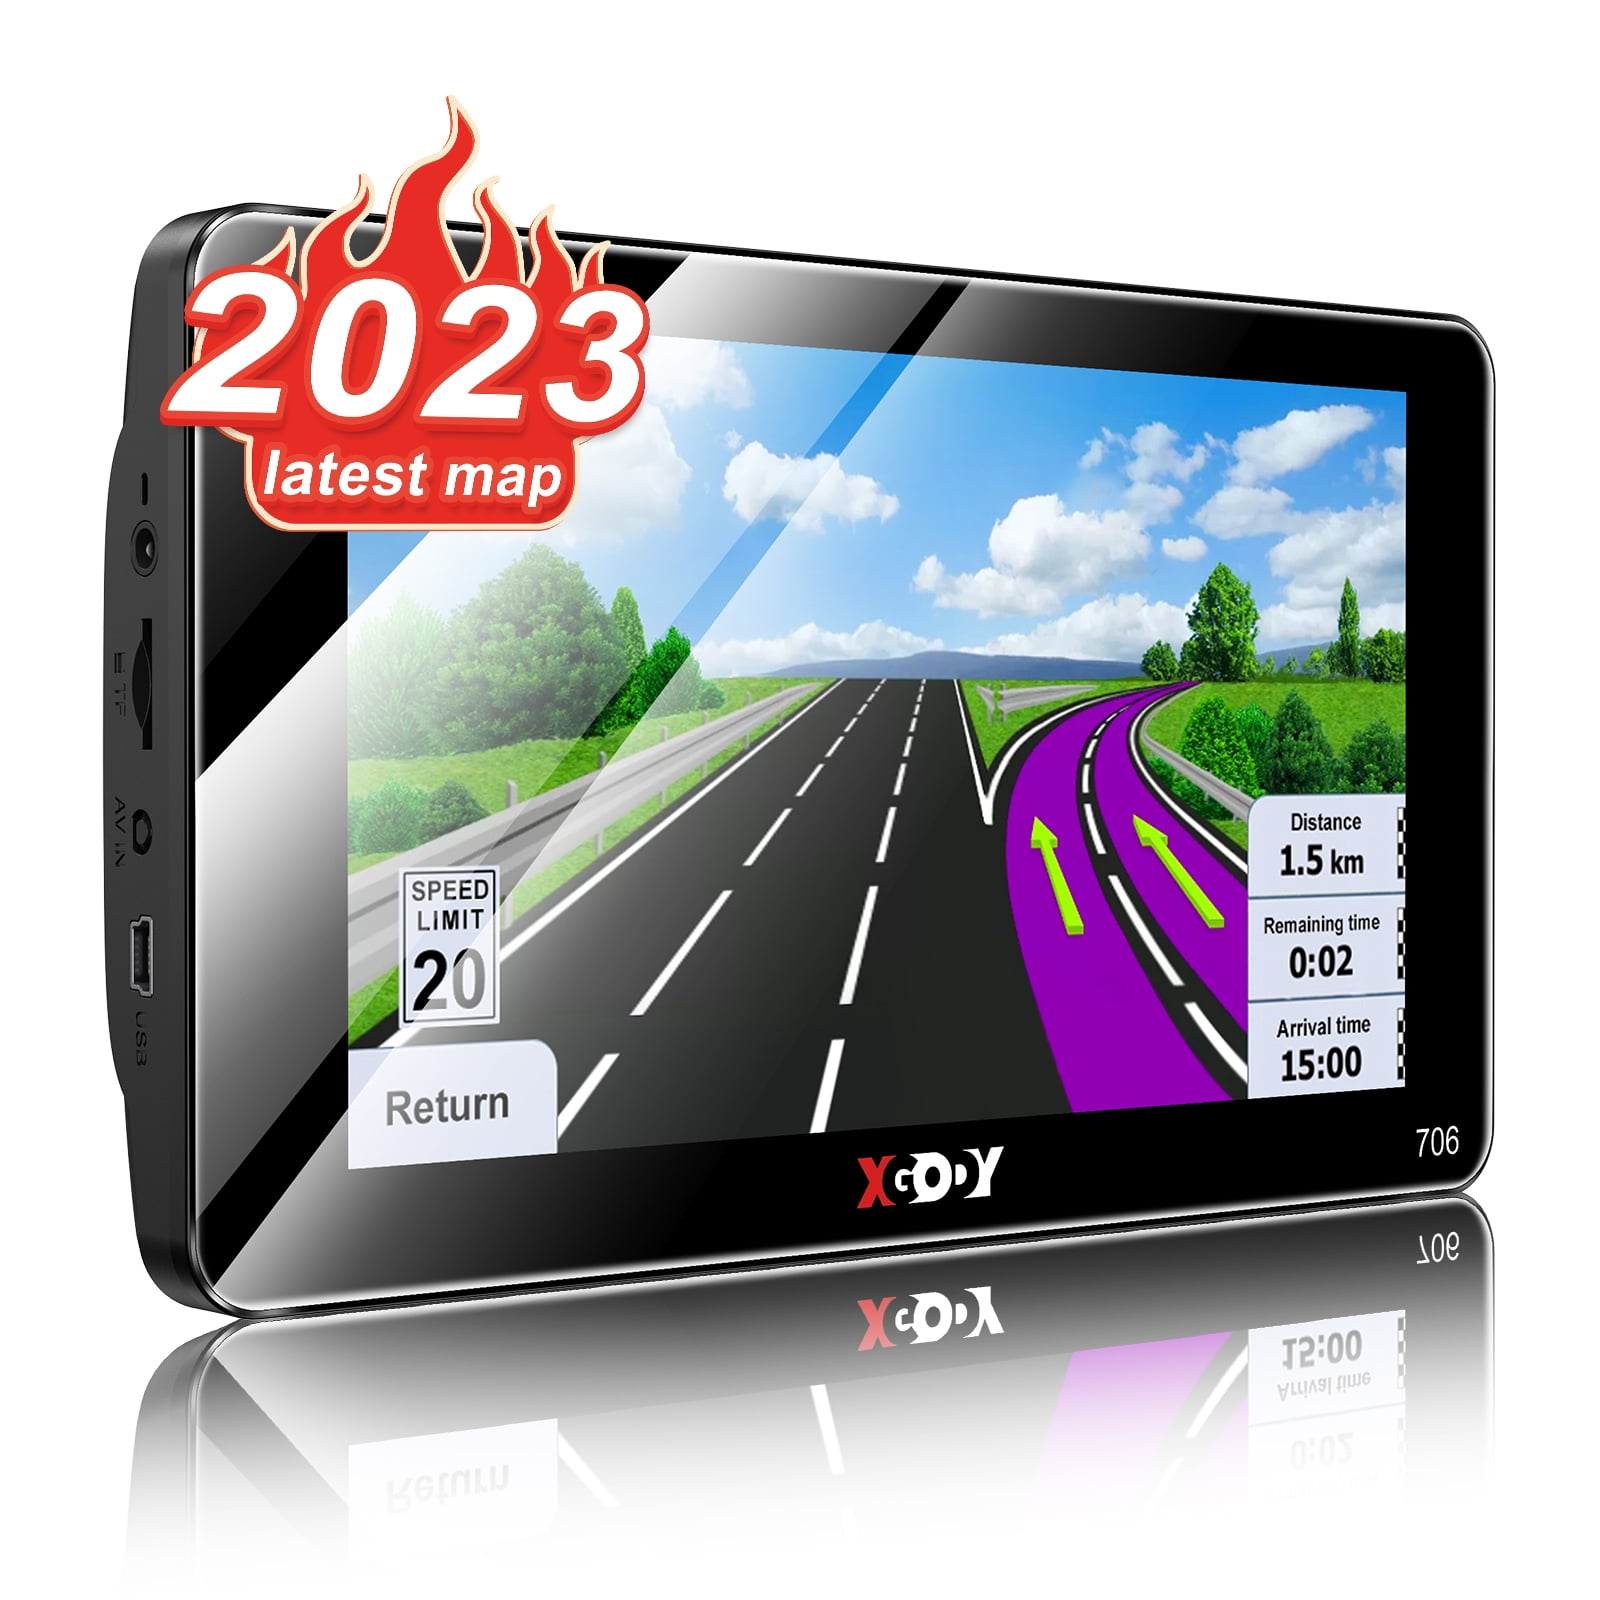 XGODY 2.5D Screen GPS Navigation for car 7 inch 2023 maps GPS for car Truck GPS Commercial Drivers semi Trucker Navigation System 8GB 256M with Guidance Free map Updates -